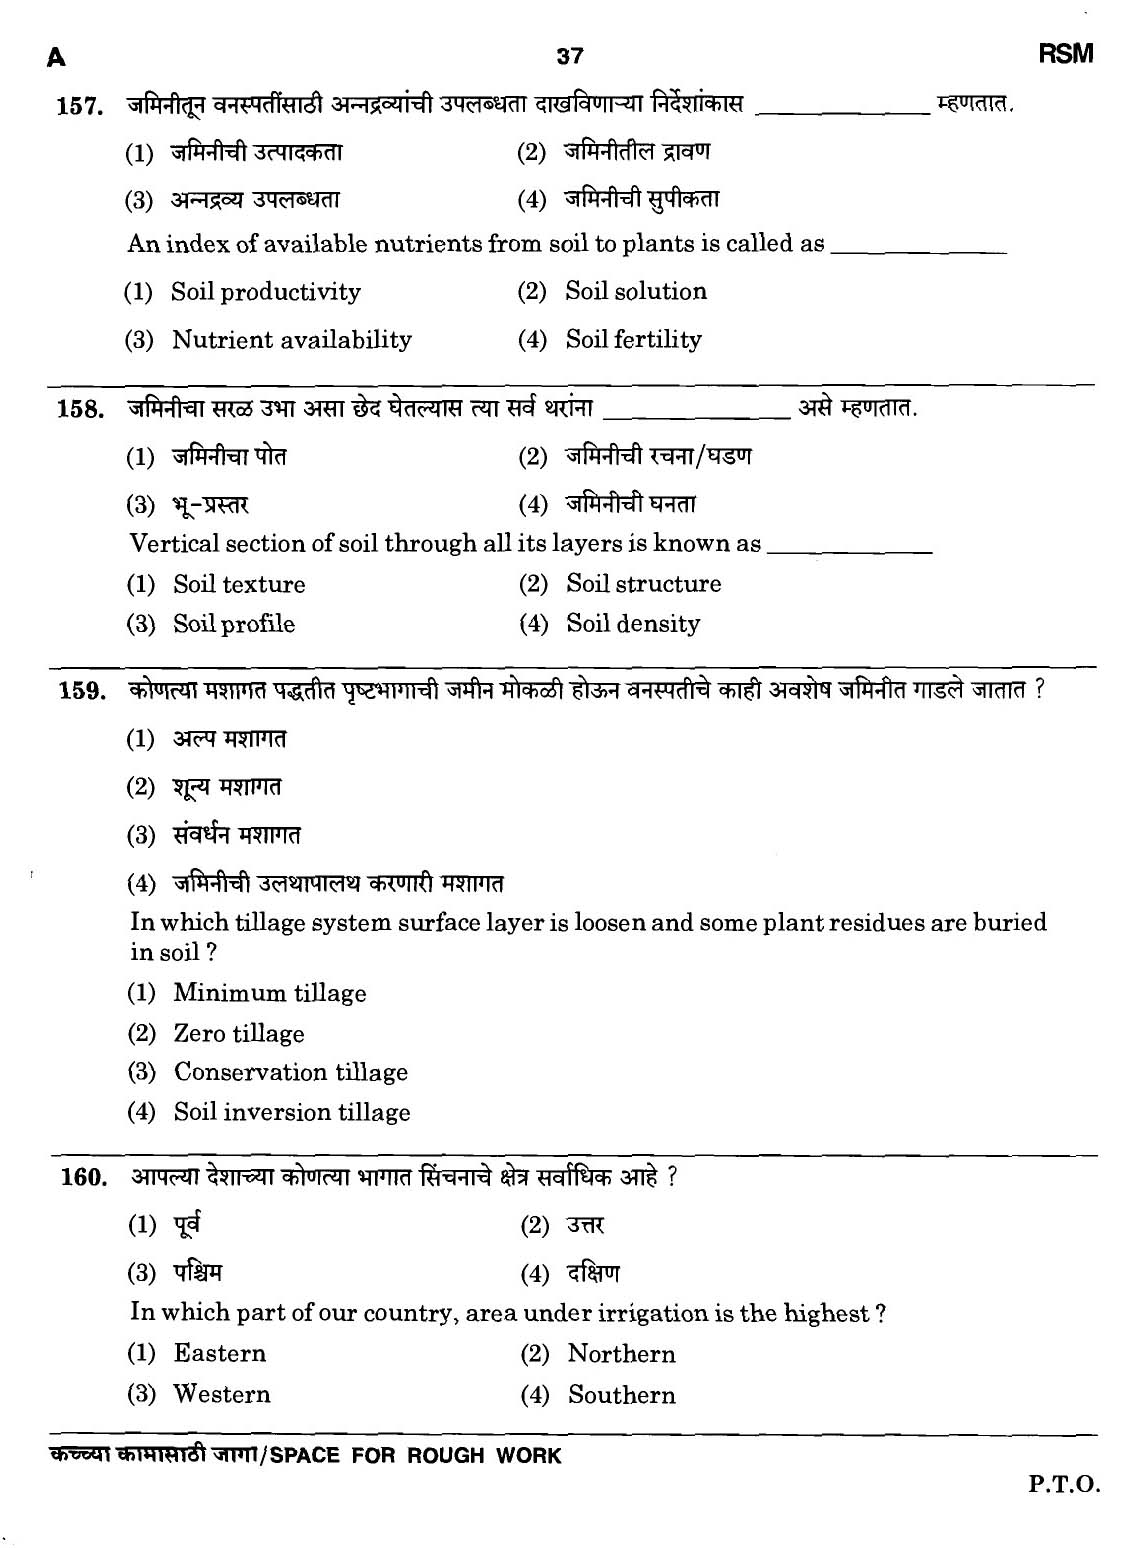 MPSC Agricultural Services Preliminary Exam 2011 Question Paper 36